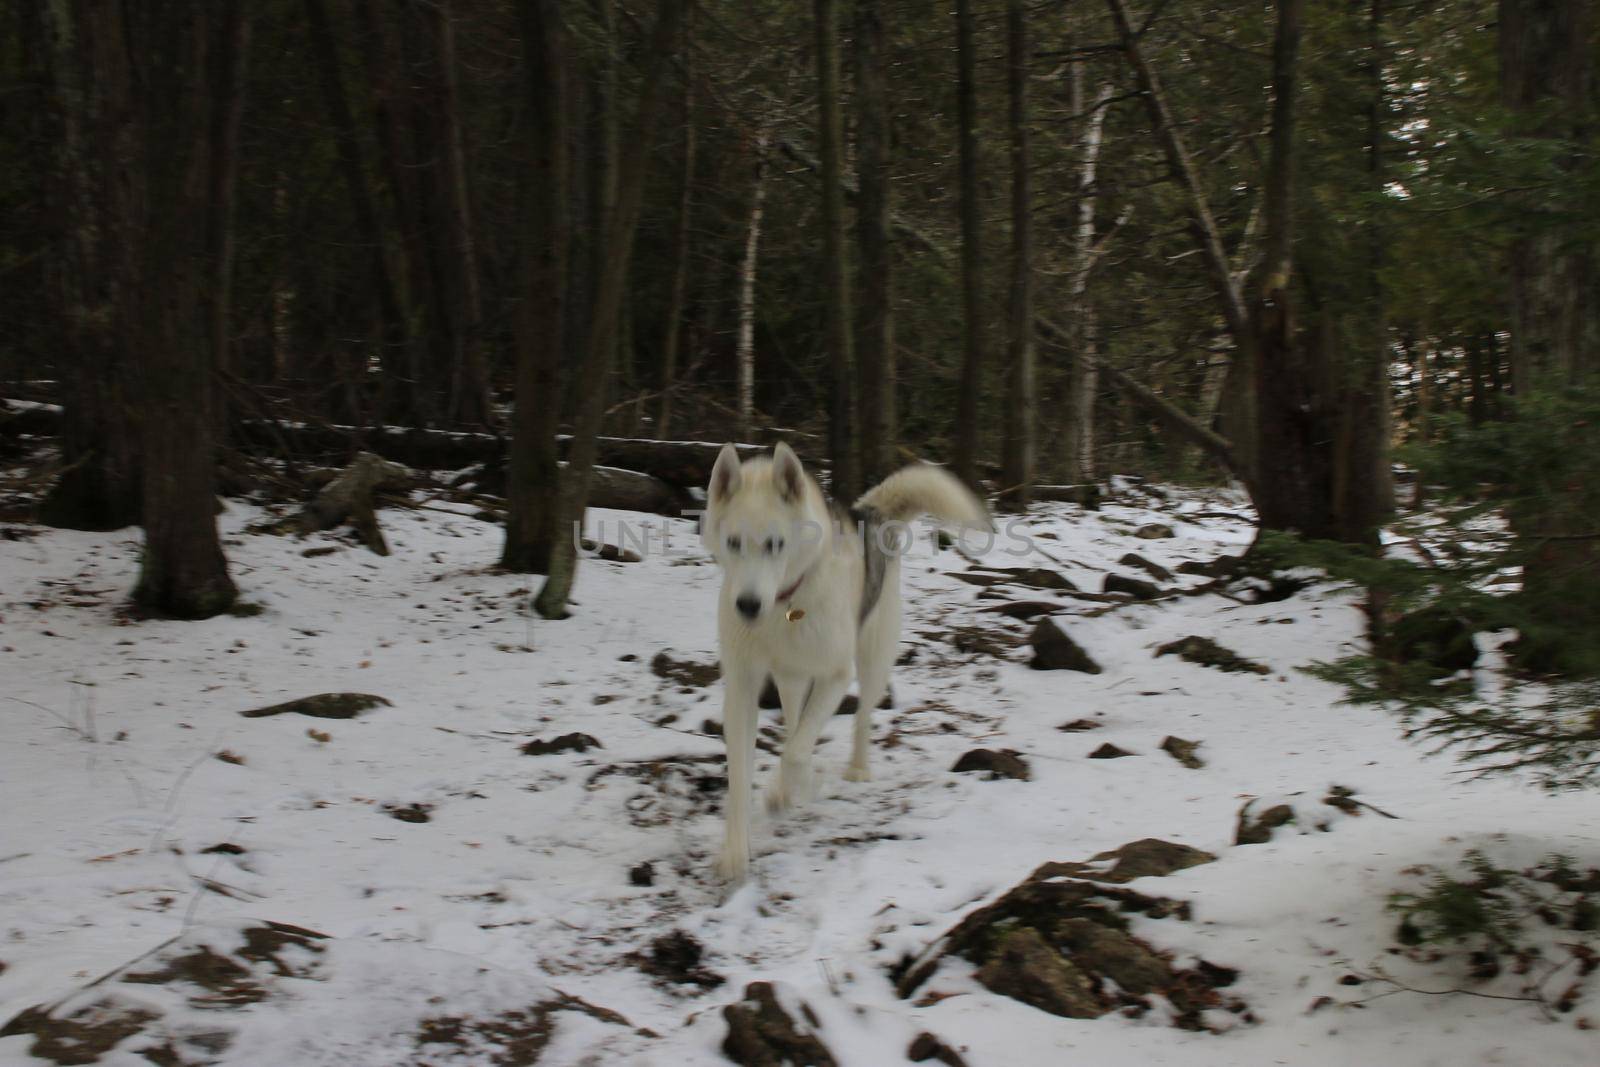 Husky hiking through a snowy winter forest. High quality photo